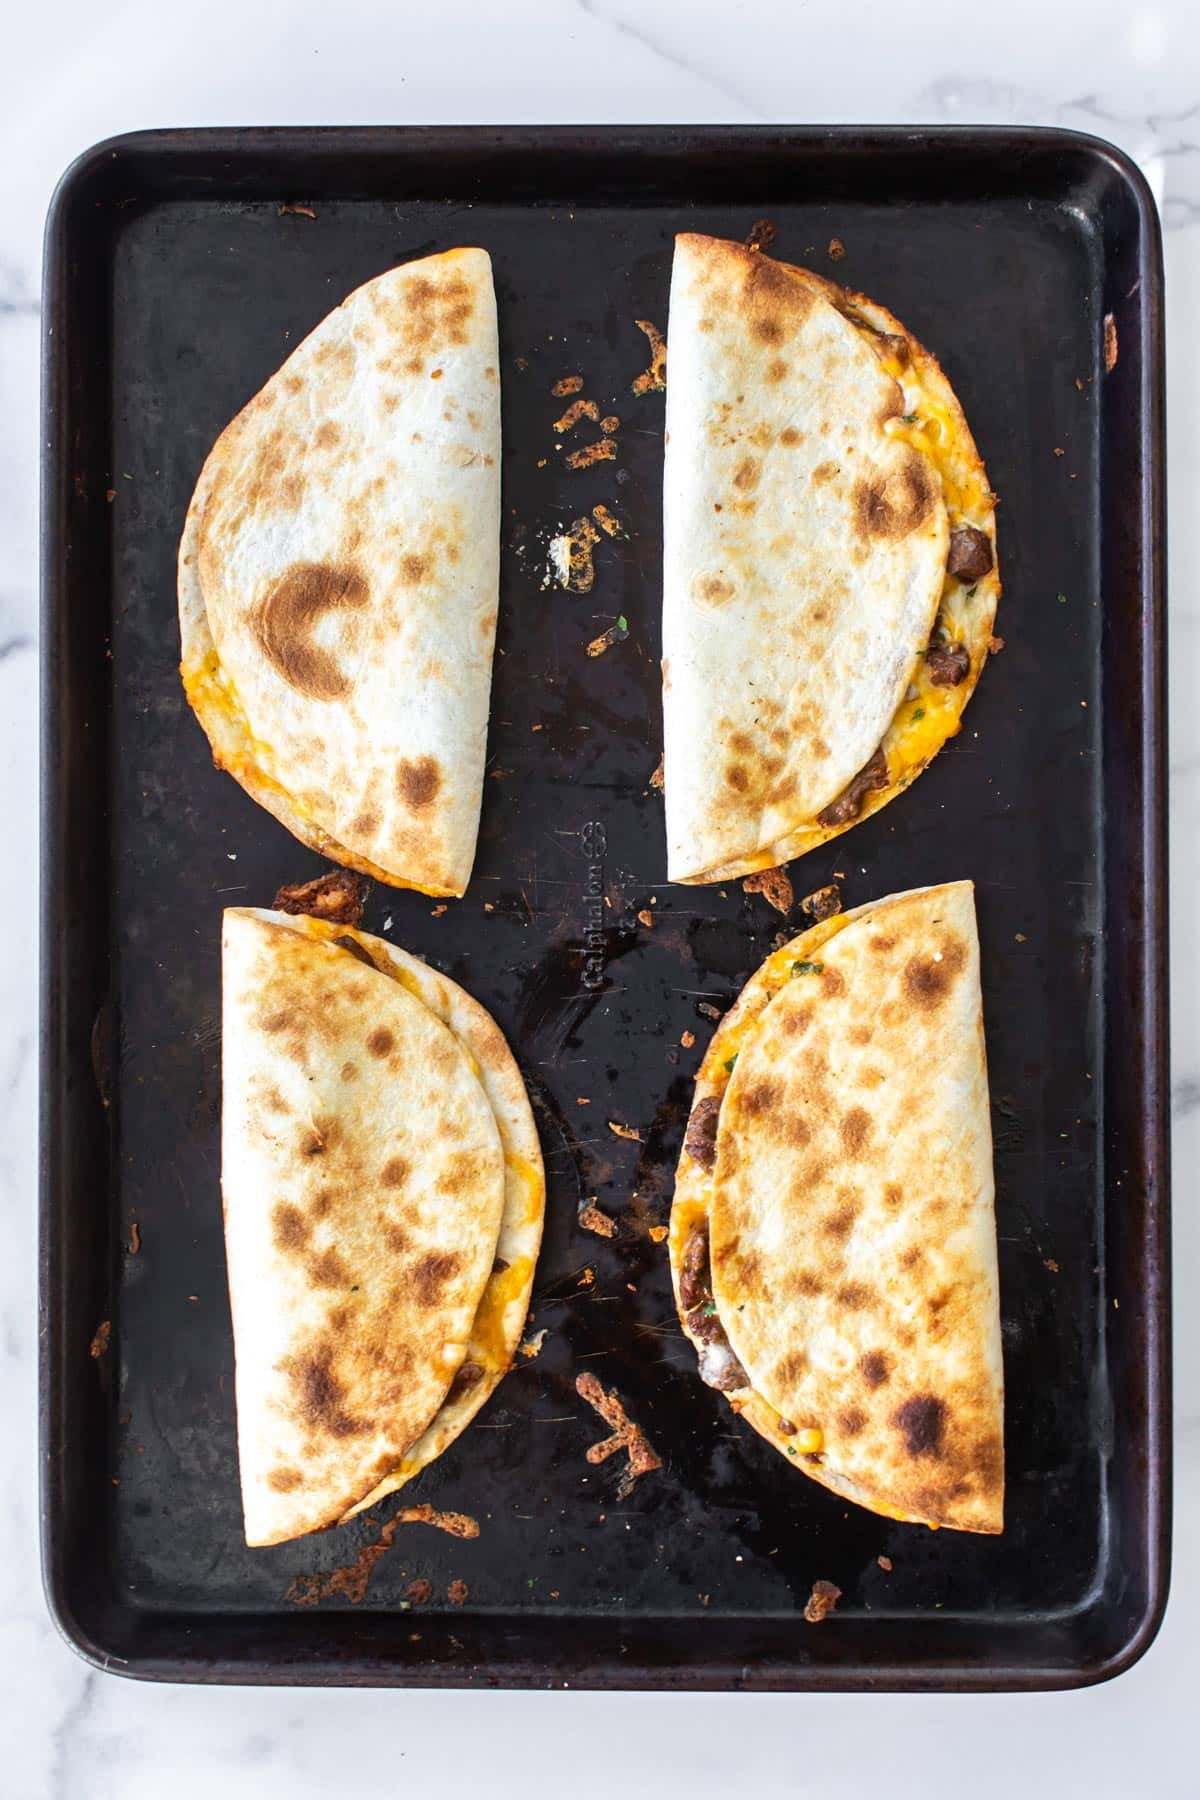 the cooked quesadillas on a sheet pan.